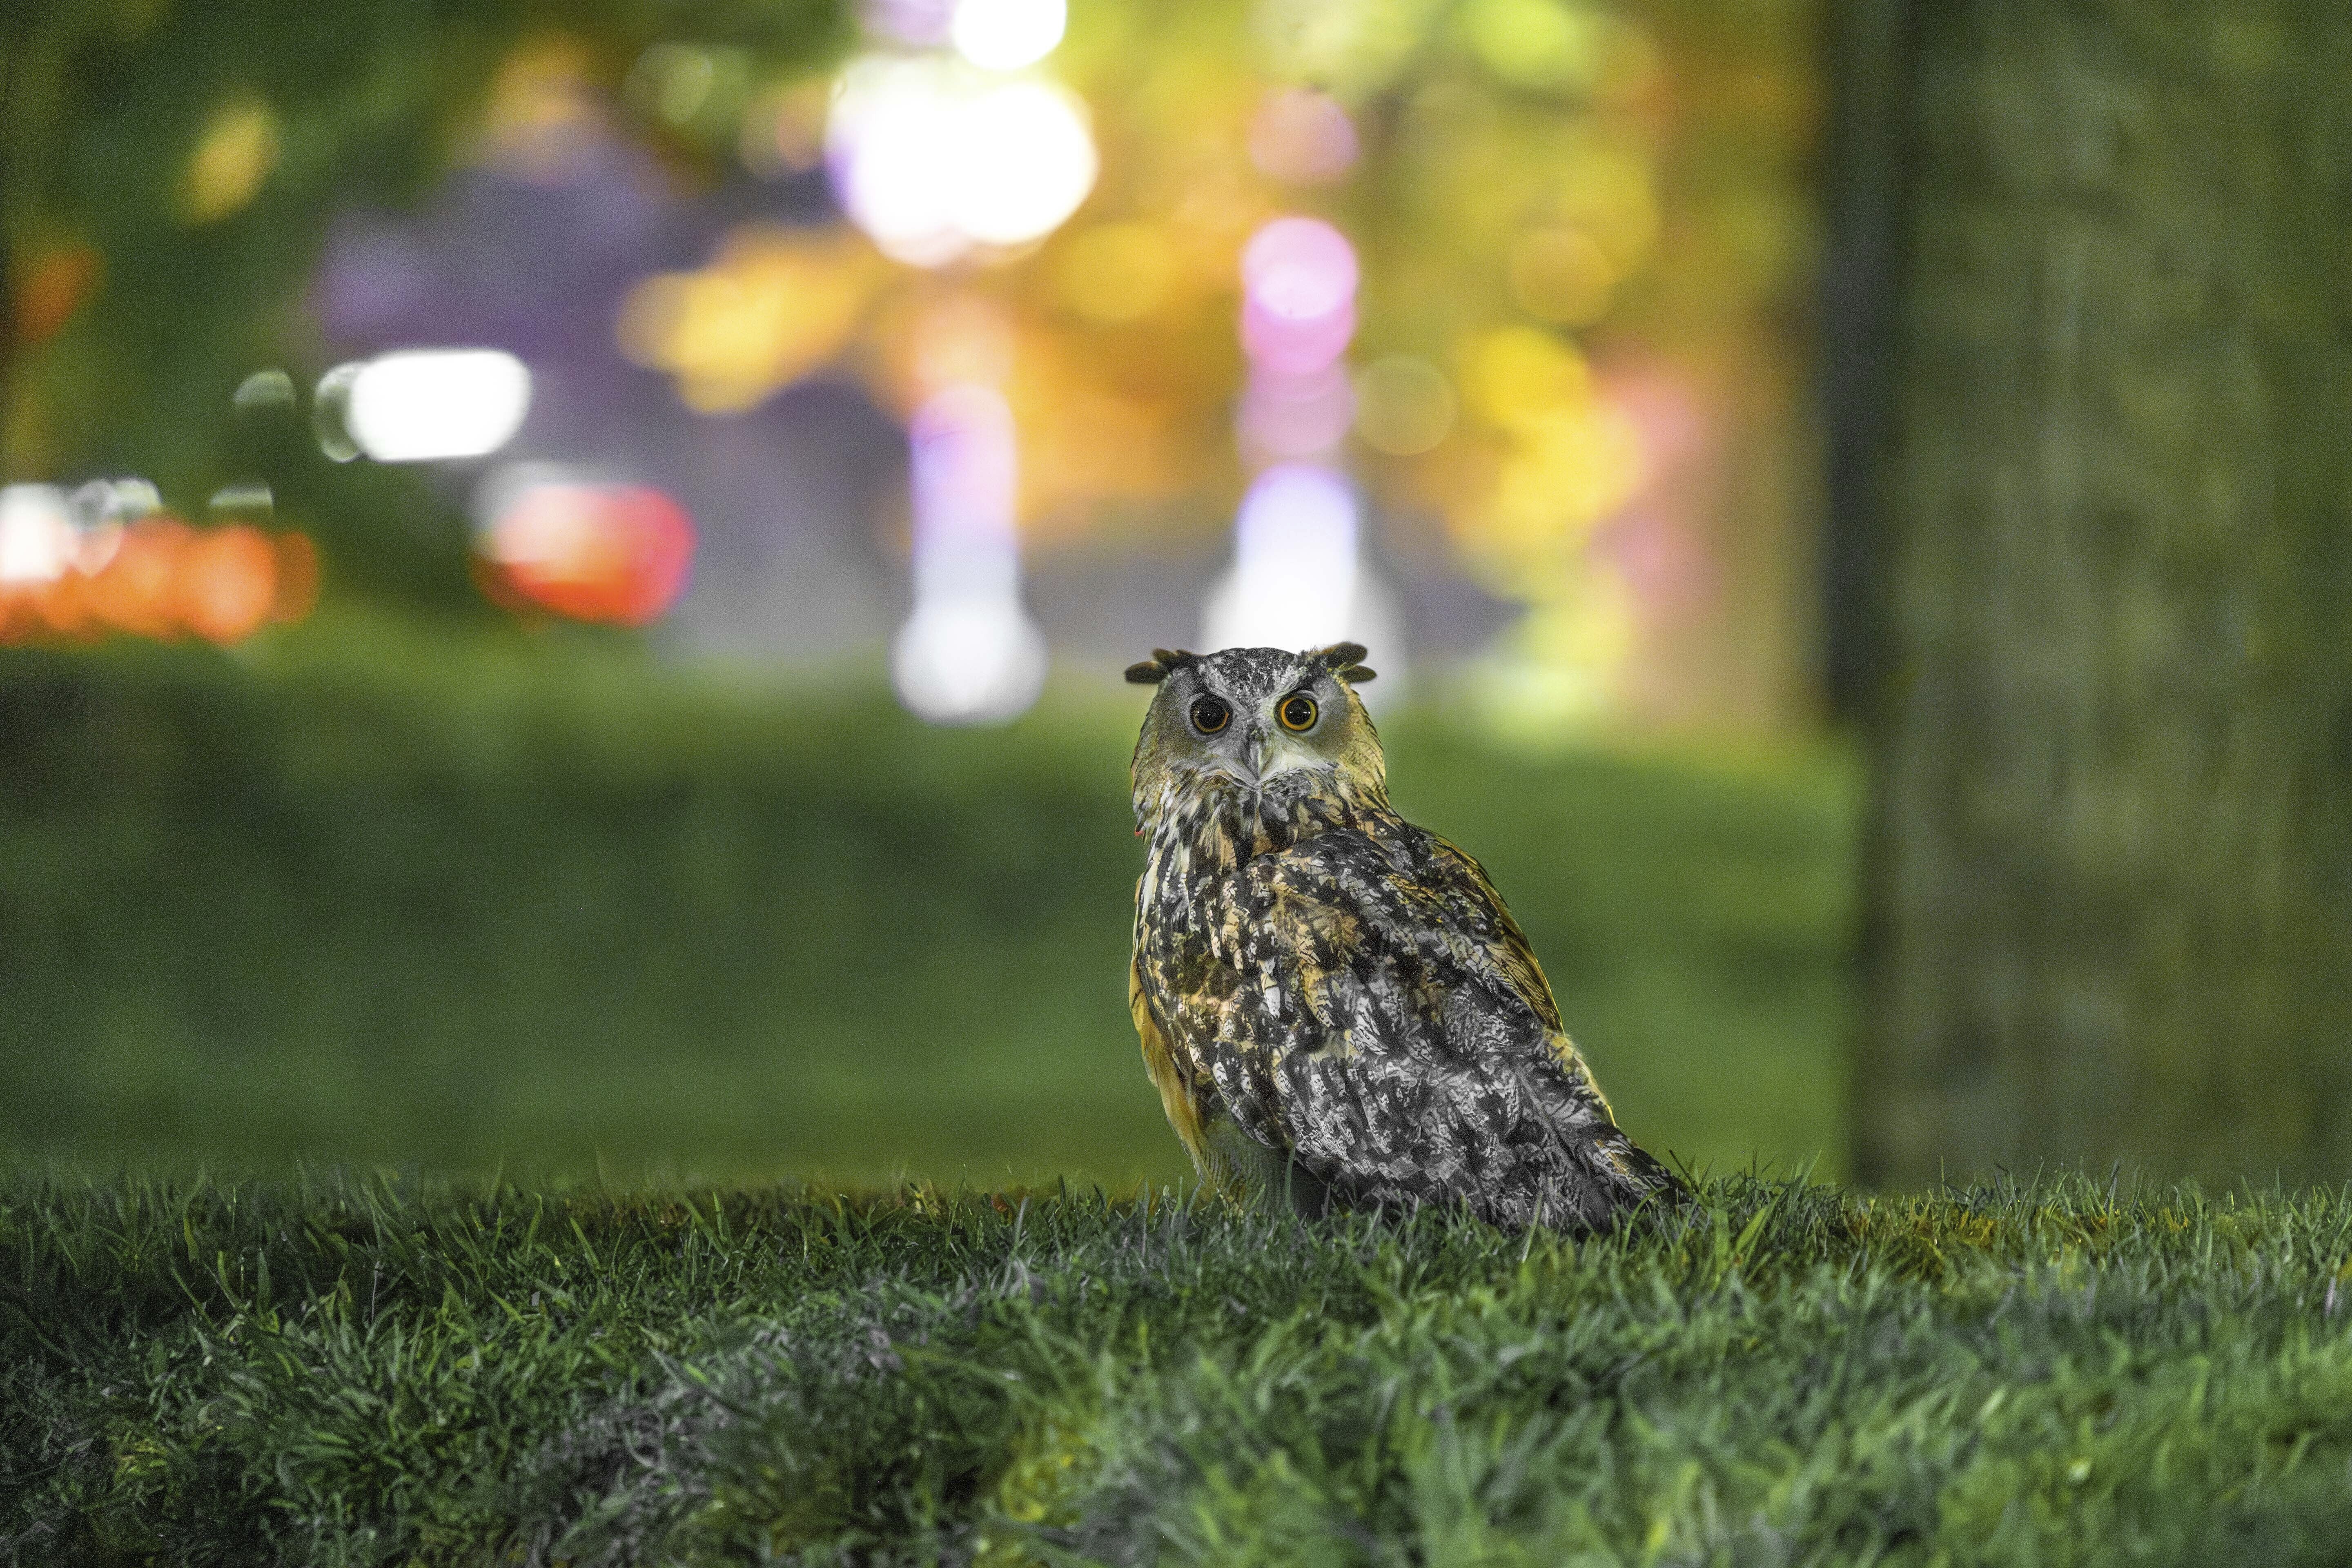 Zoologists in New York confirm the reason for Flaco the owl's death.